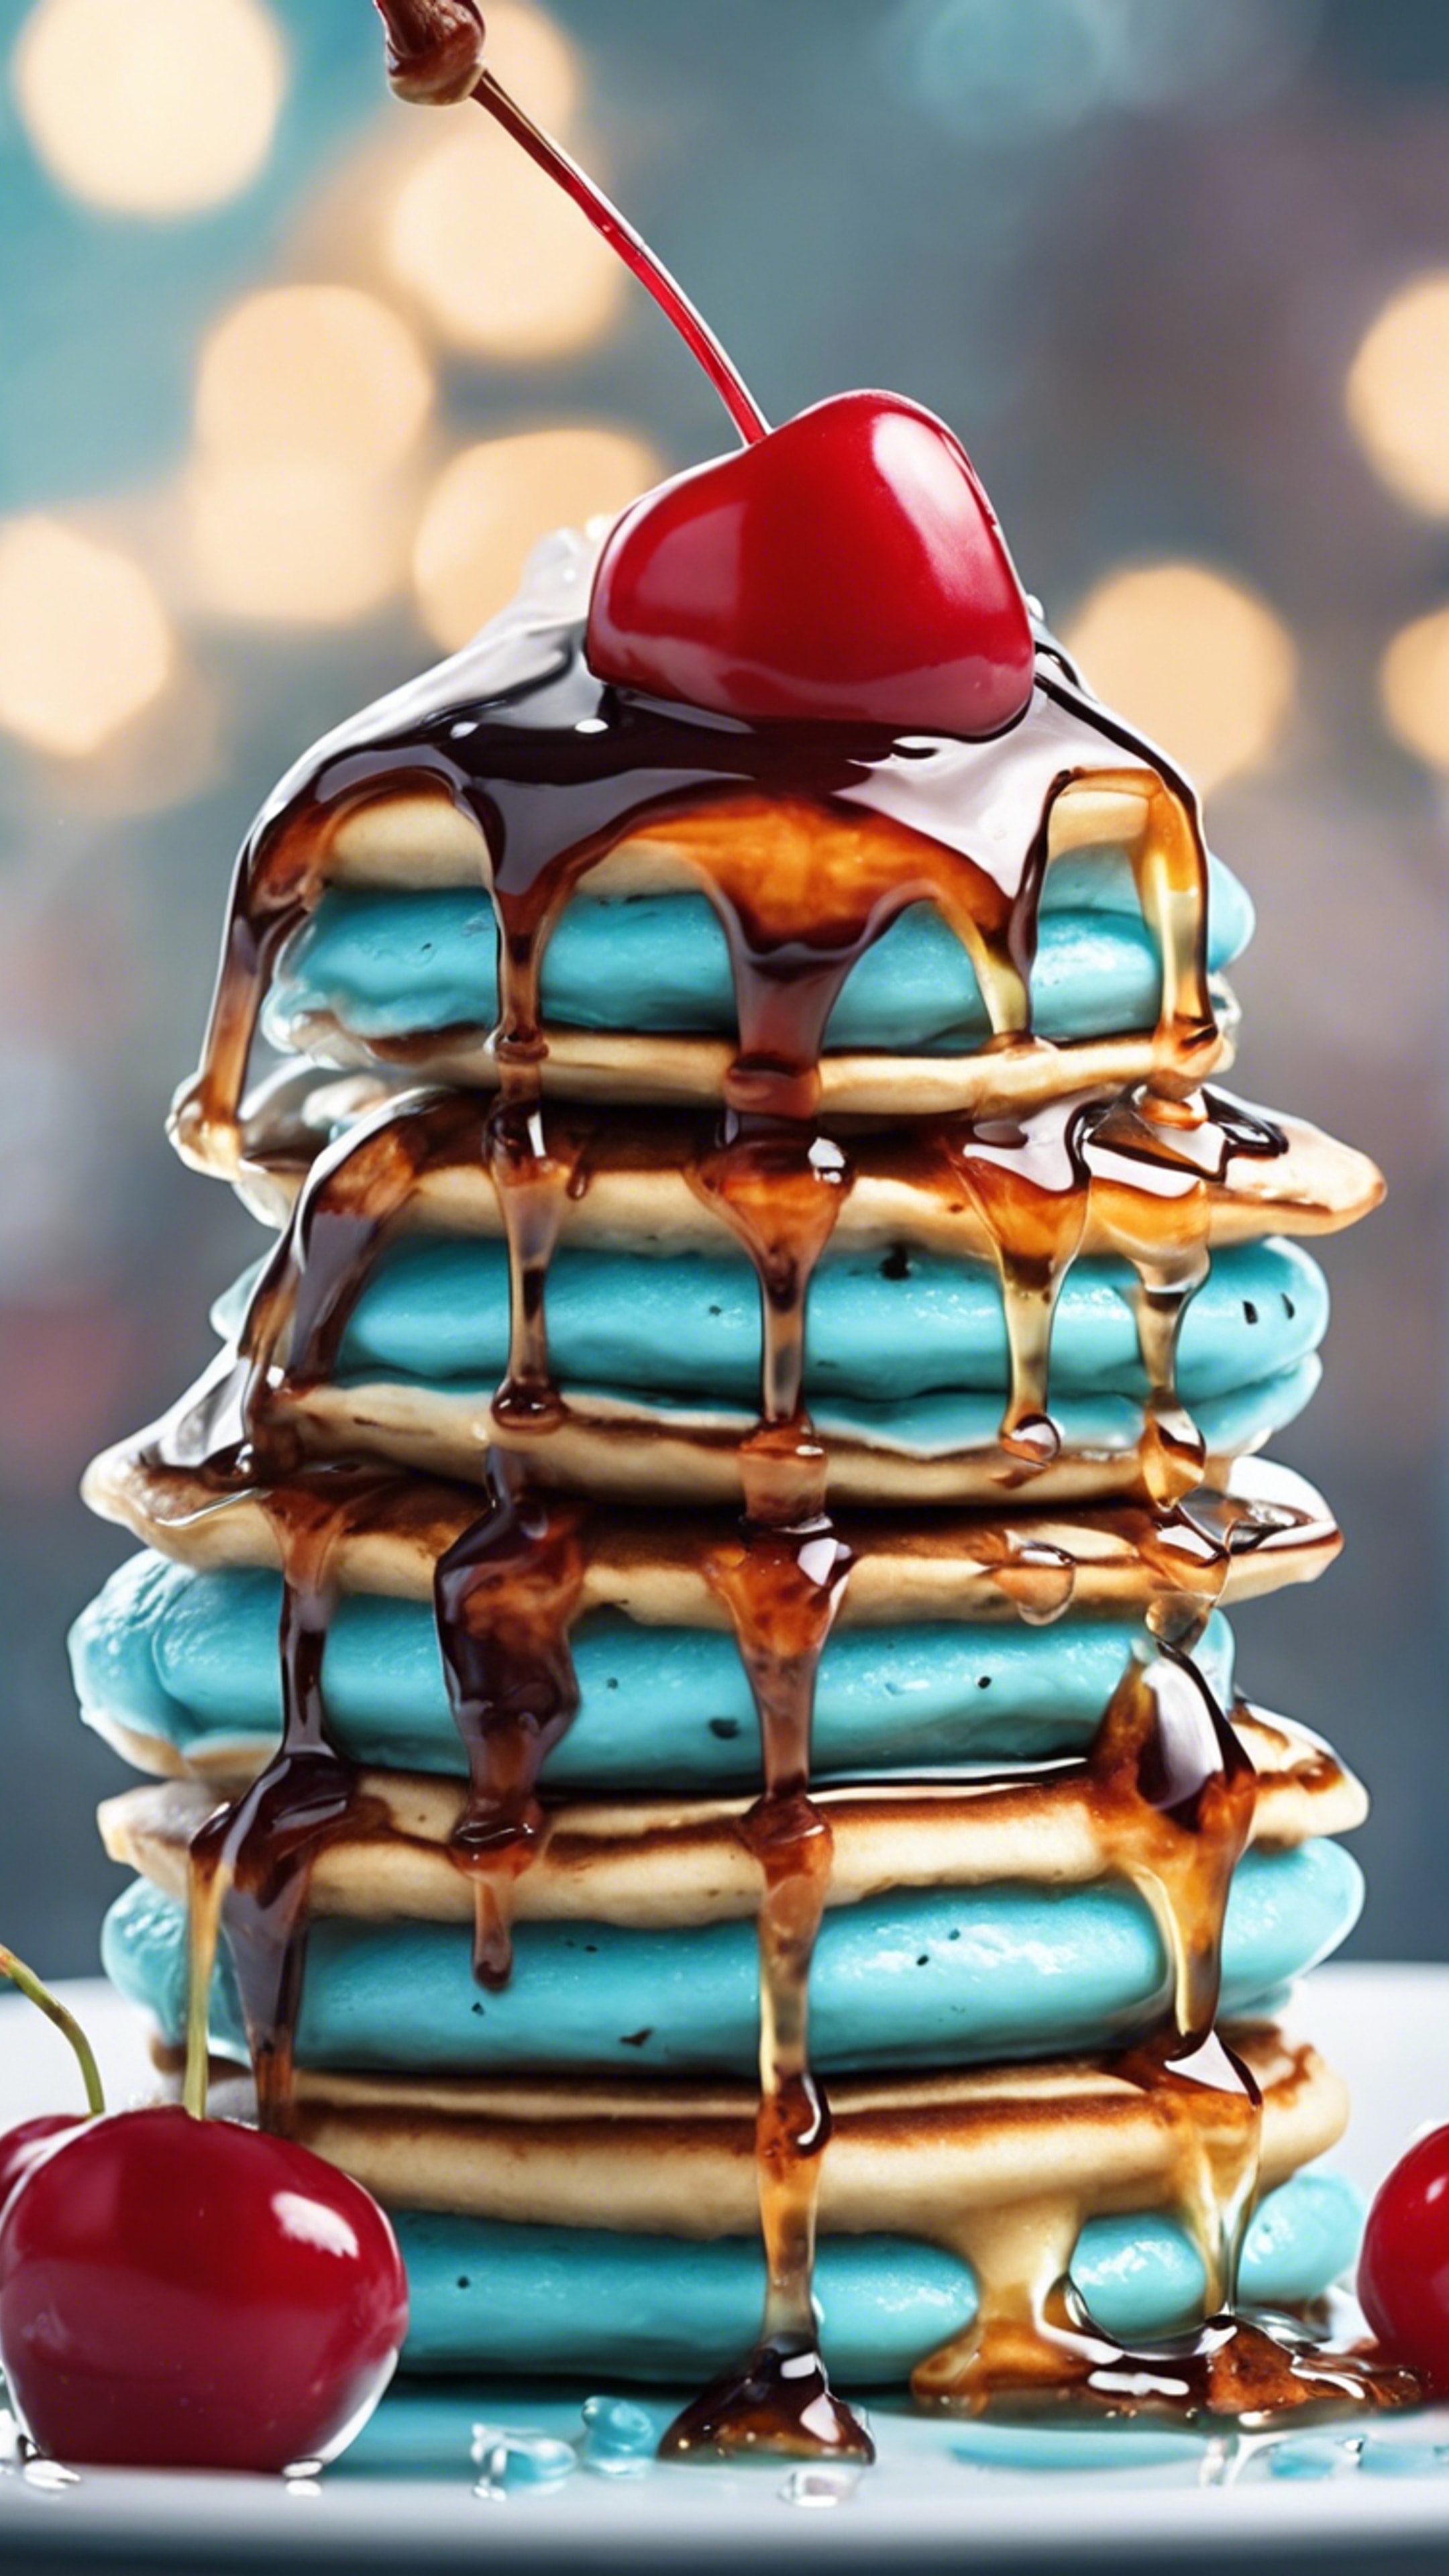 A stack of kawaii light blue pancakes dripping with syrup and a cherry on top. Tapet[05c3a9af3a95463c8379]